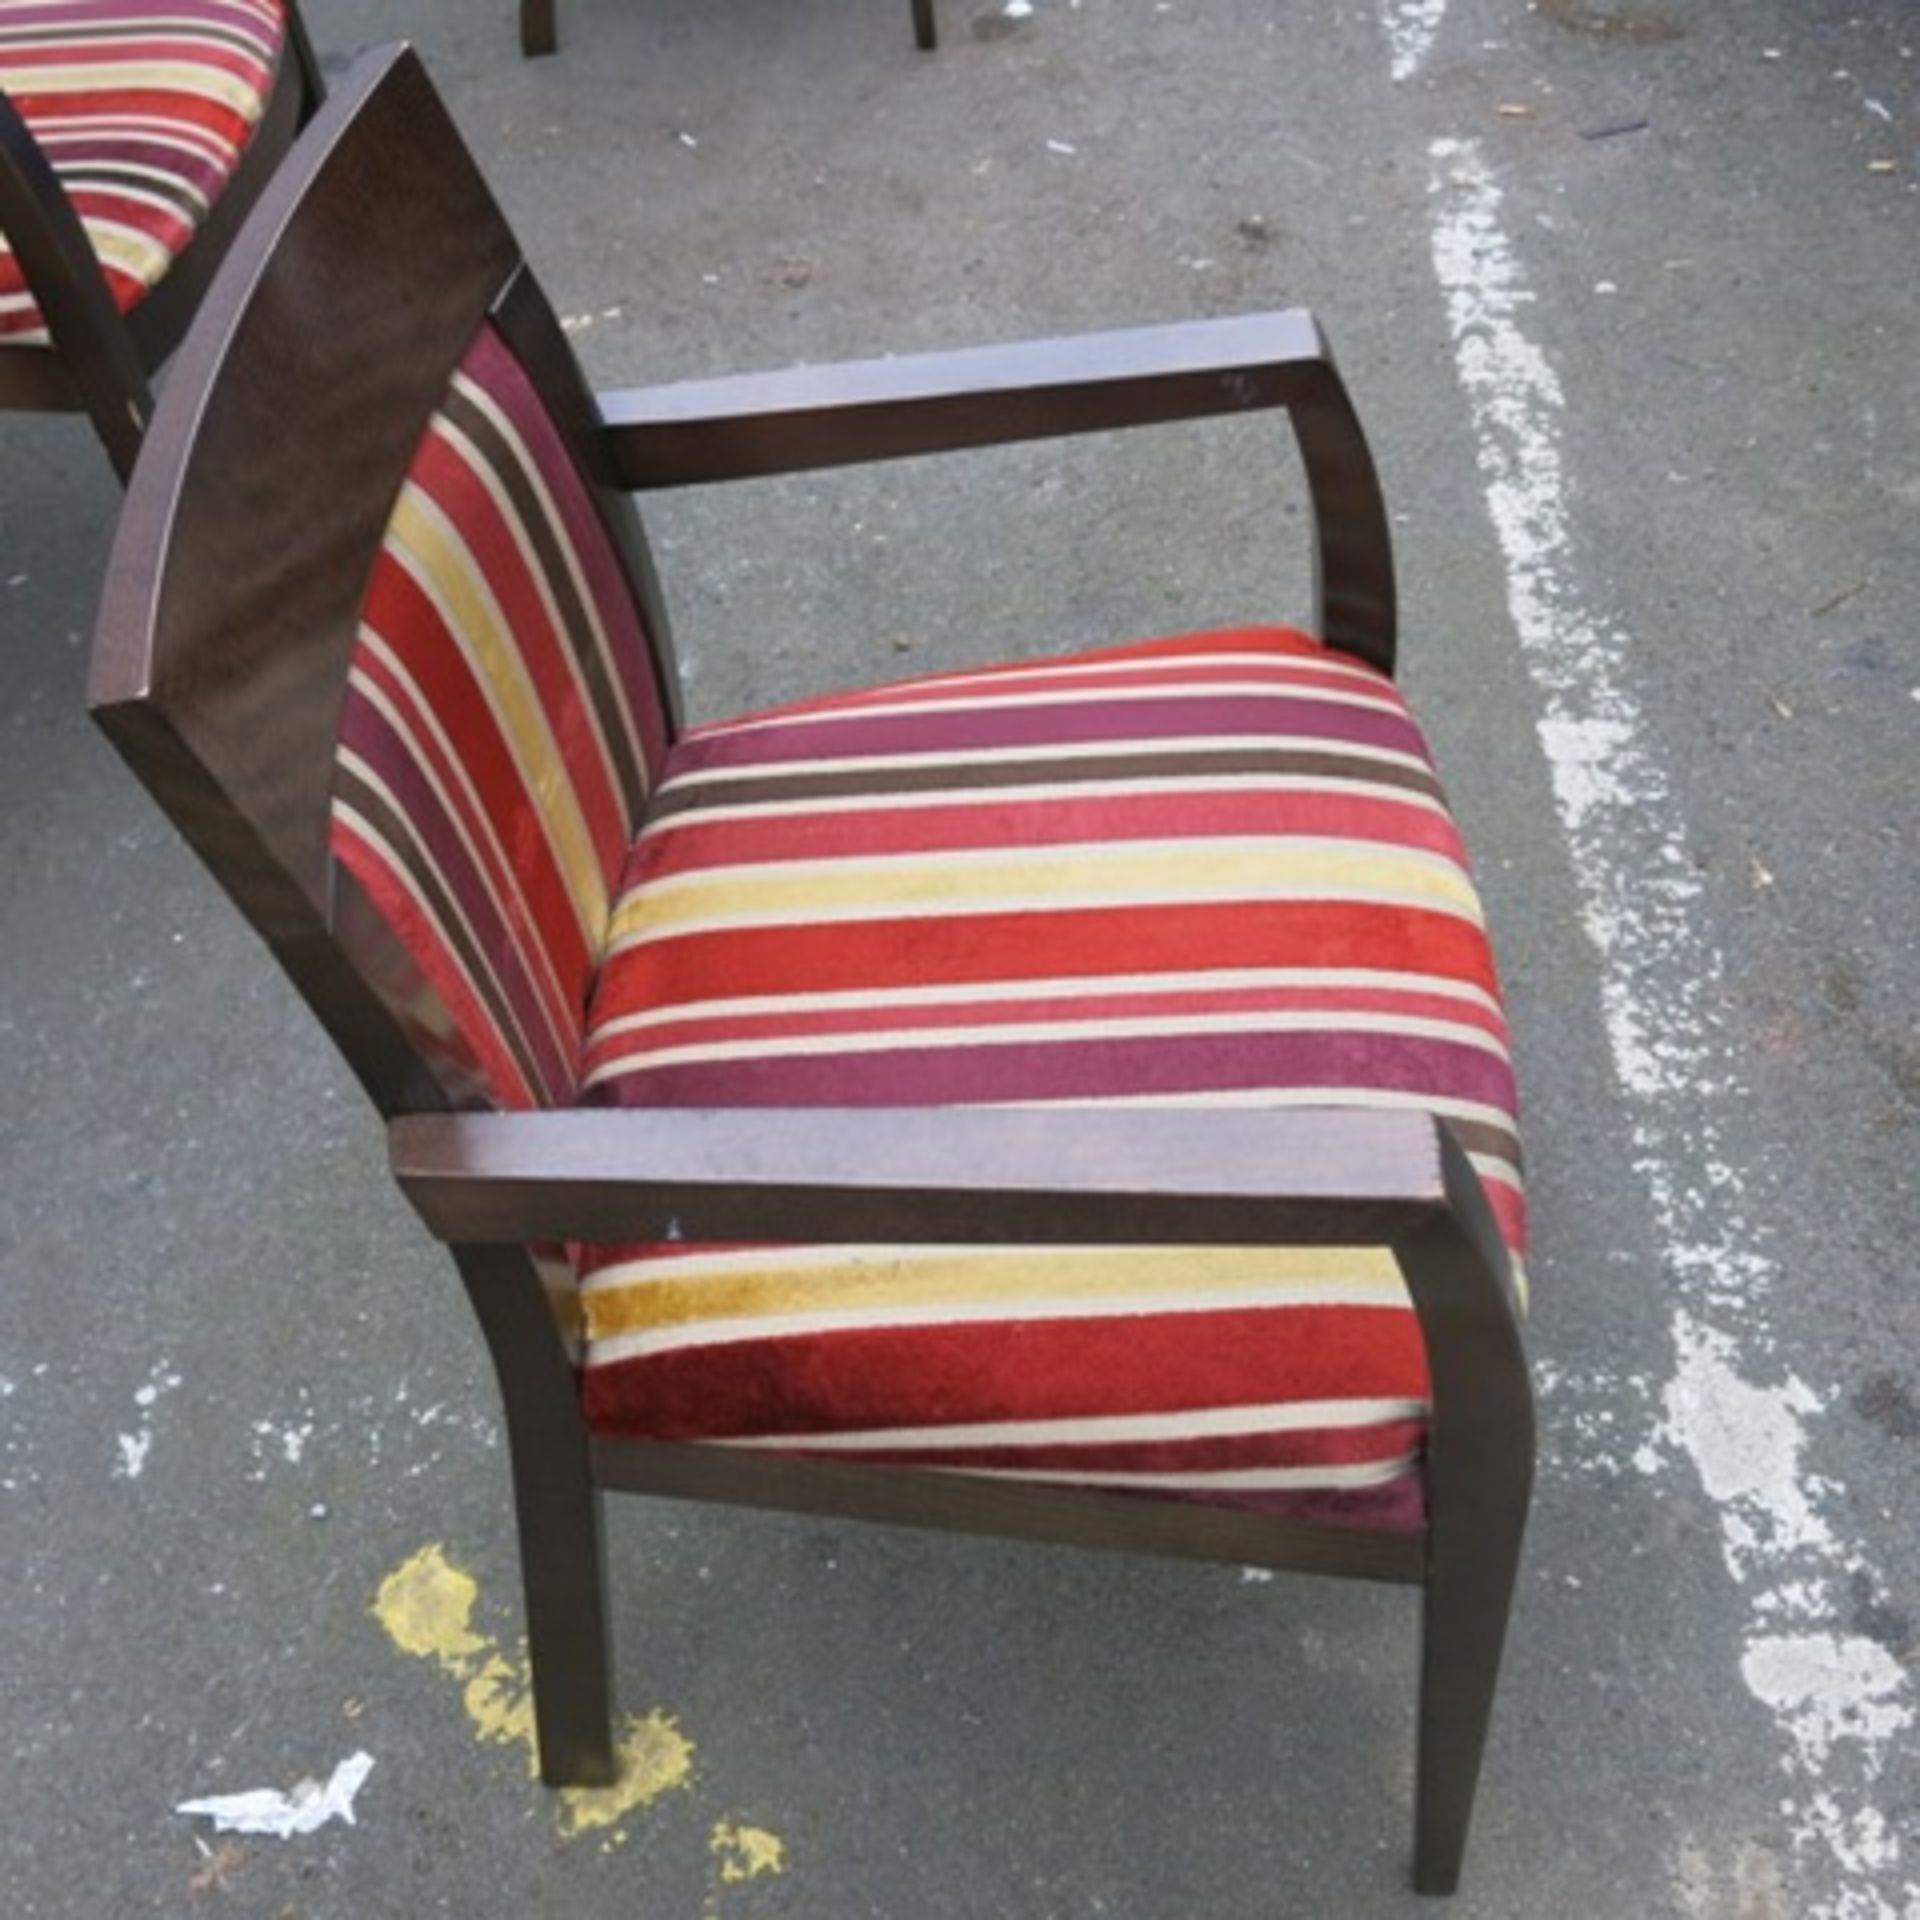 5 x Stained Darkwood Dining Chairs, Upholstered in Red/Gold/Brown Fabric - Image 3 of 5